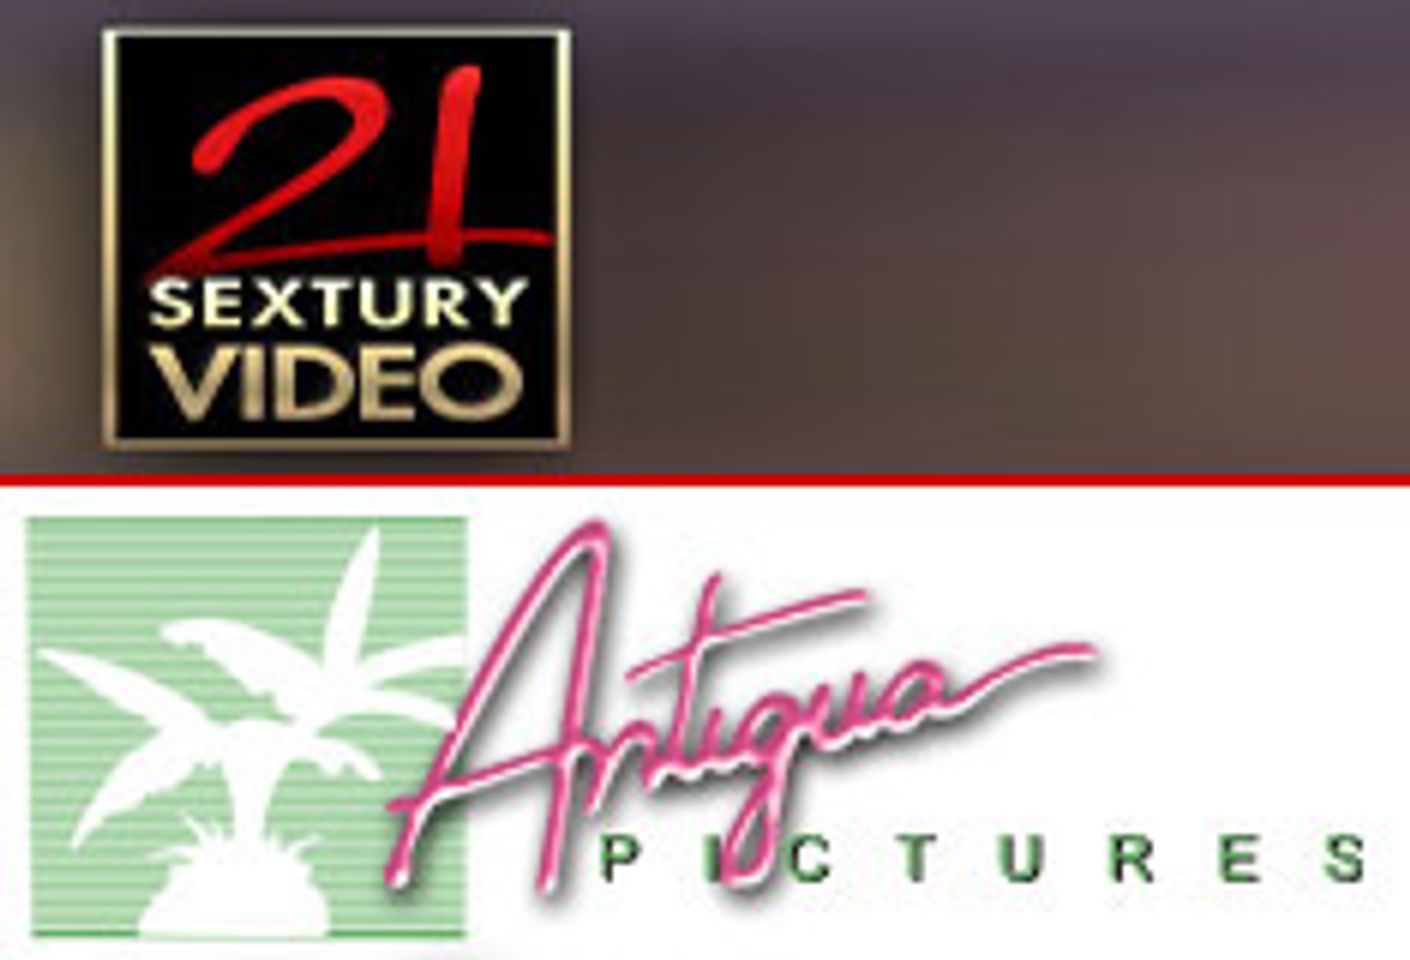 Antigua Pictures to Distribute 21st Sextury Video